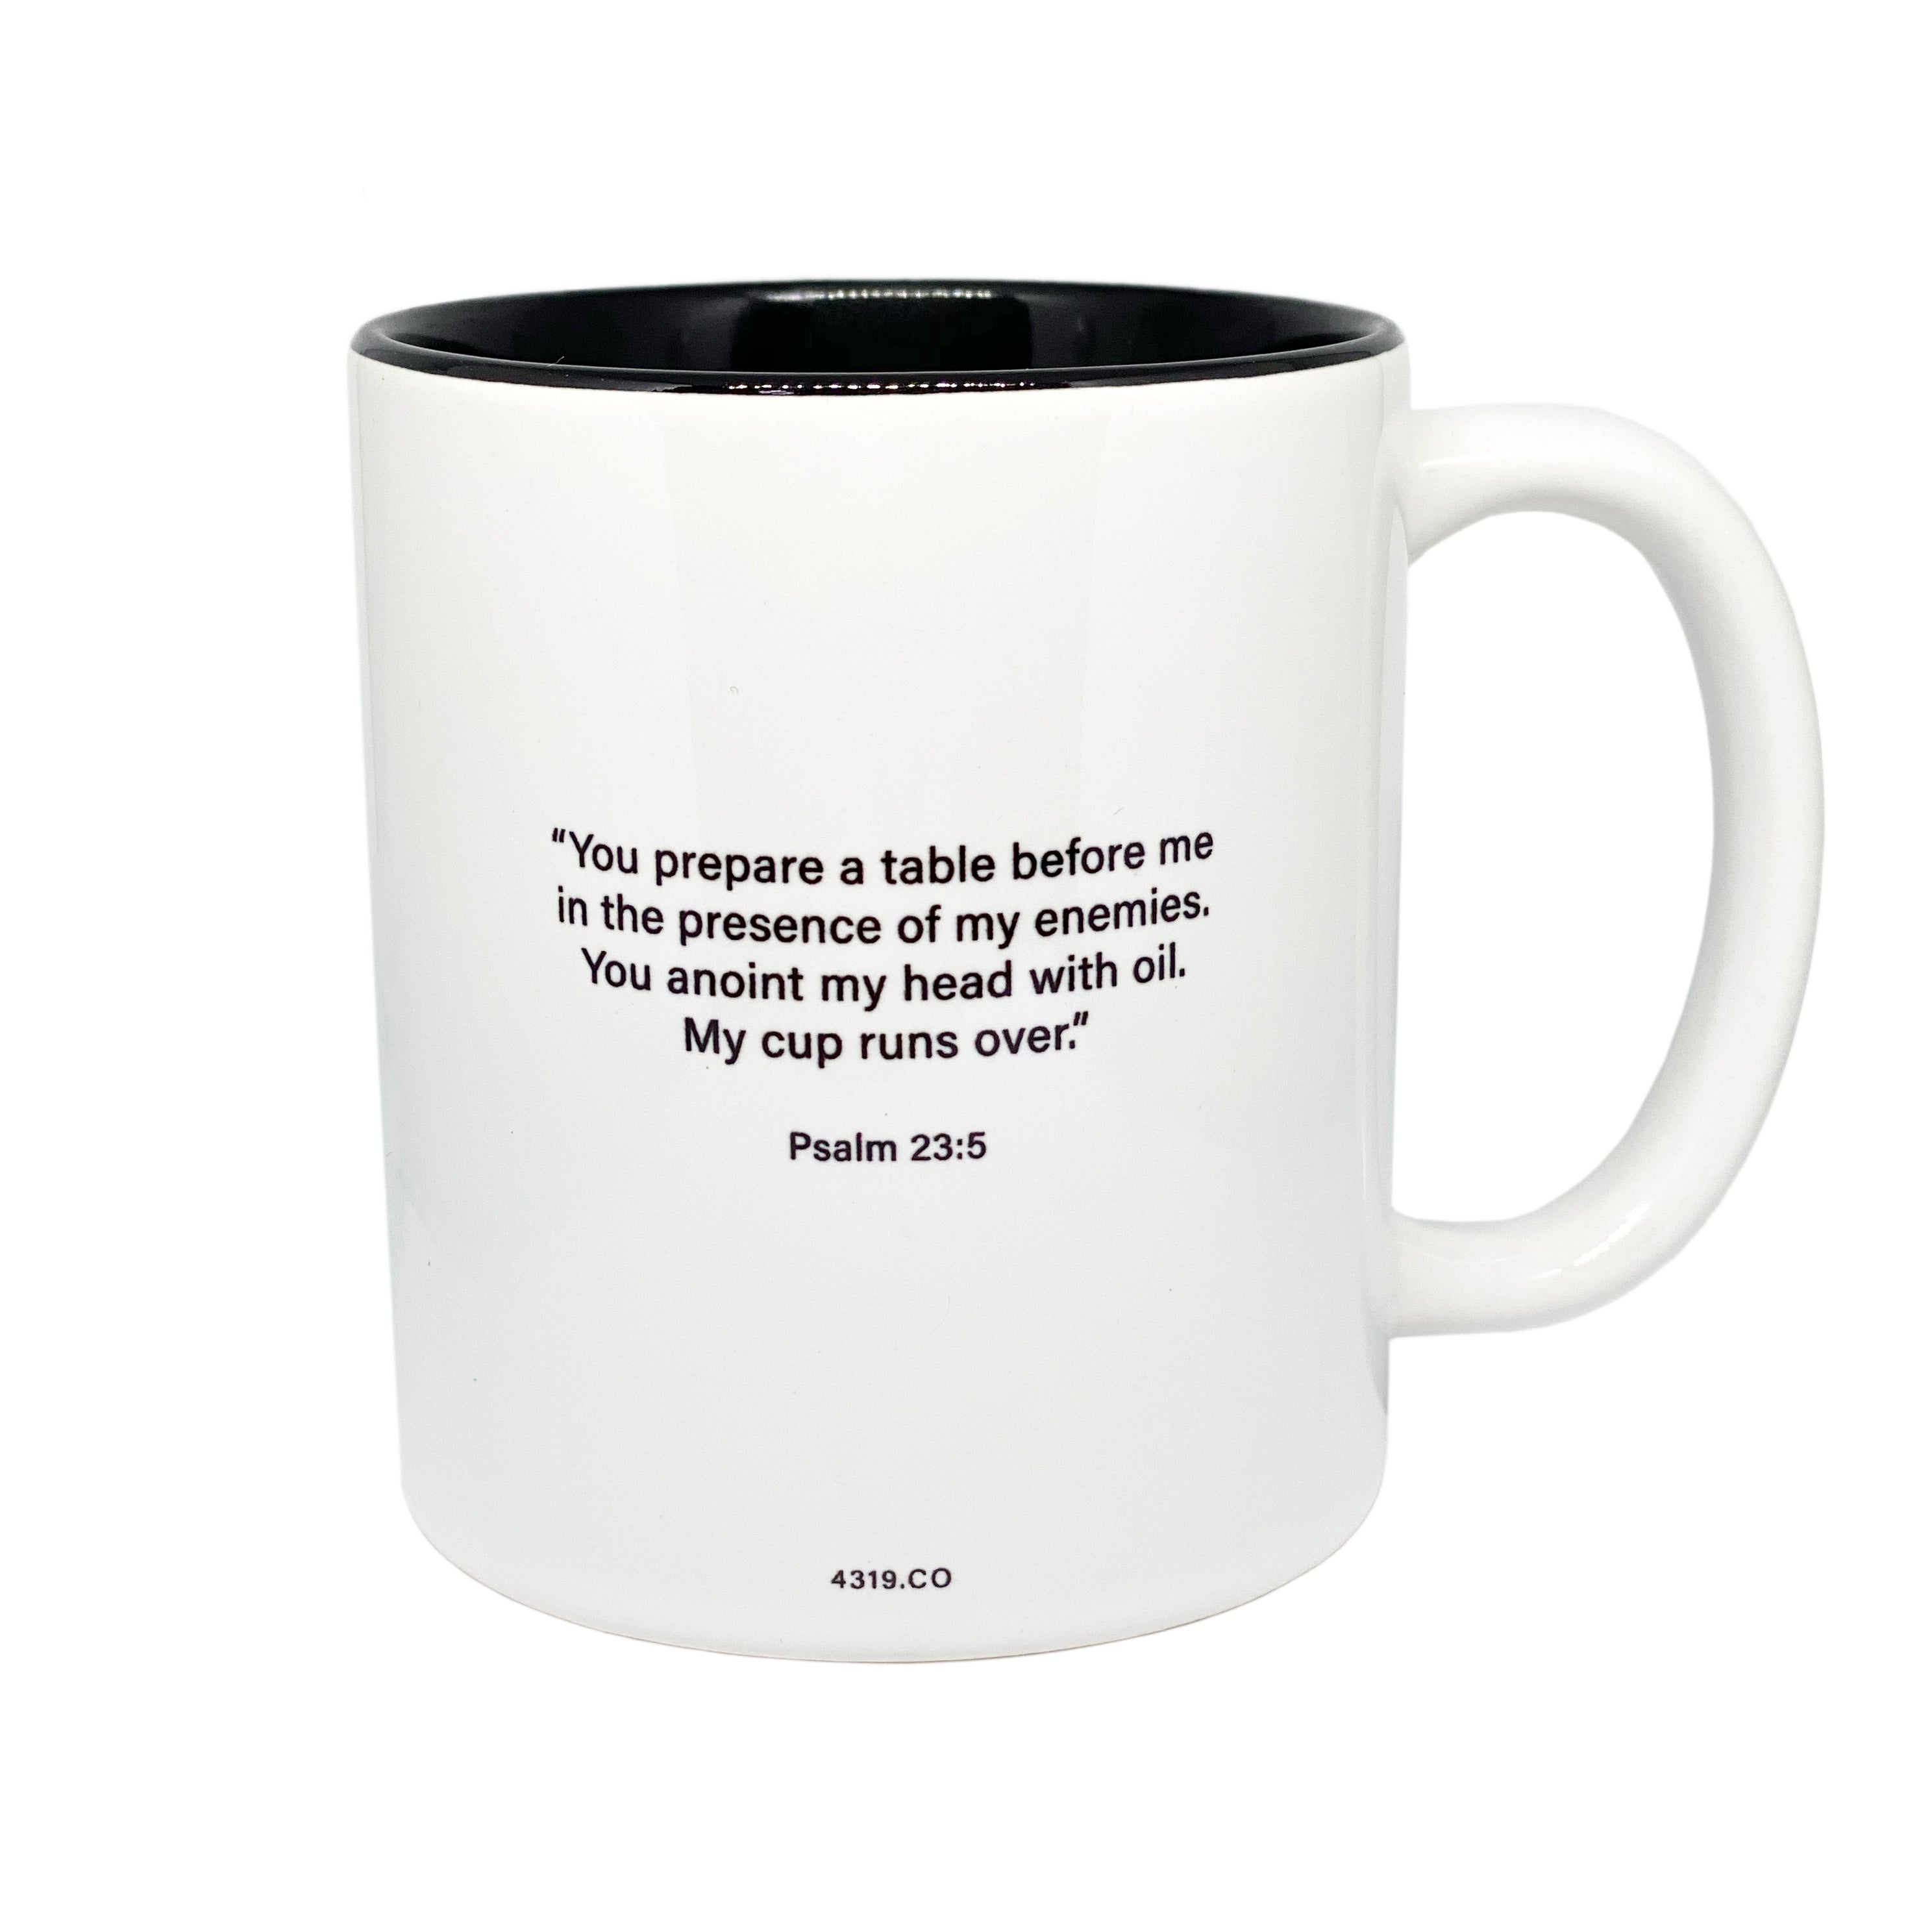 Christian Coffee Mug with Psalm 23:5 Bible Verse: Christian Gift Ideas for the Minimalistic Christian Home. White Black 11oz